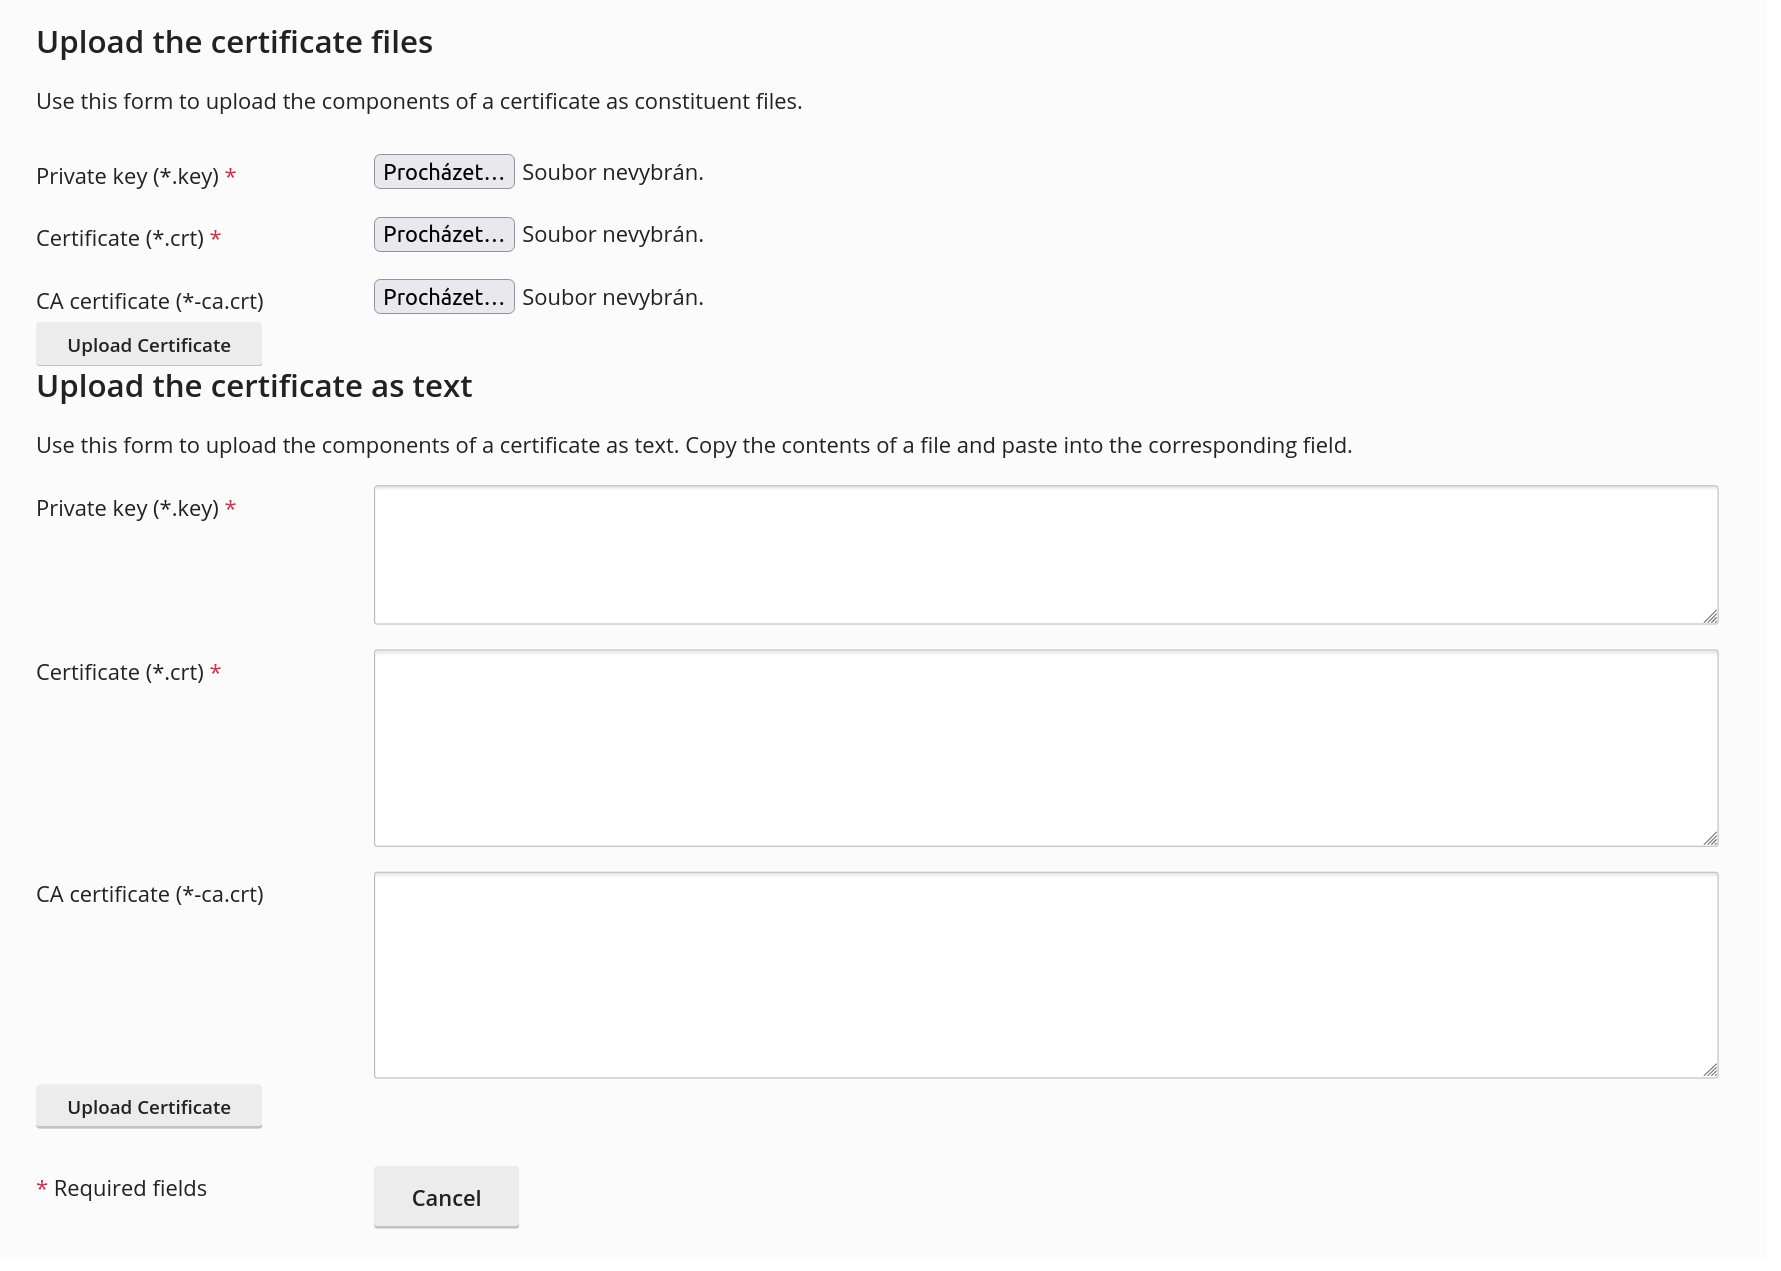 Certificate and private key upload to server